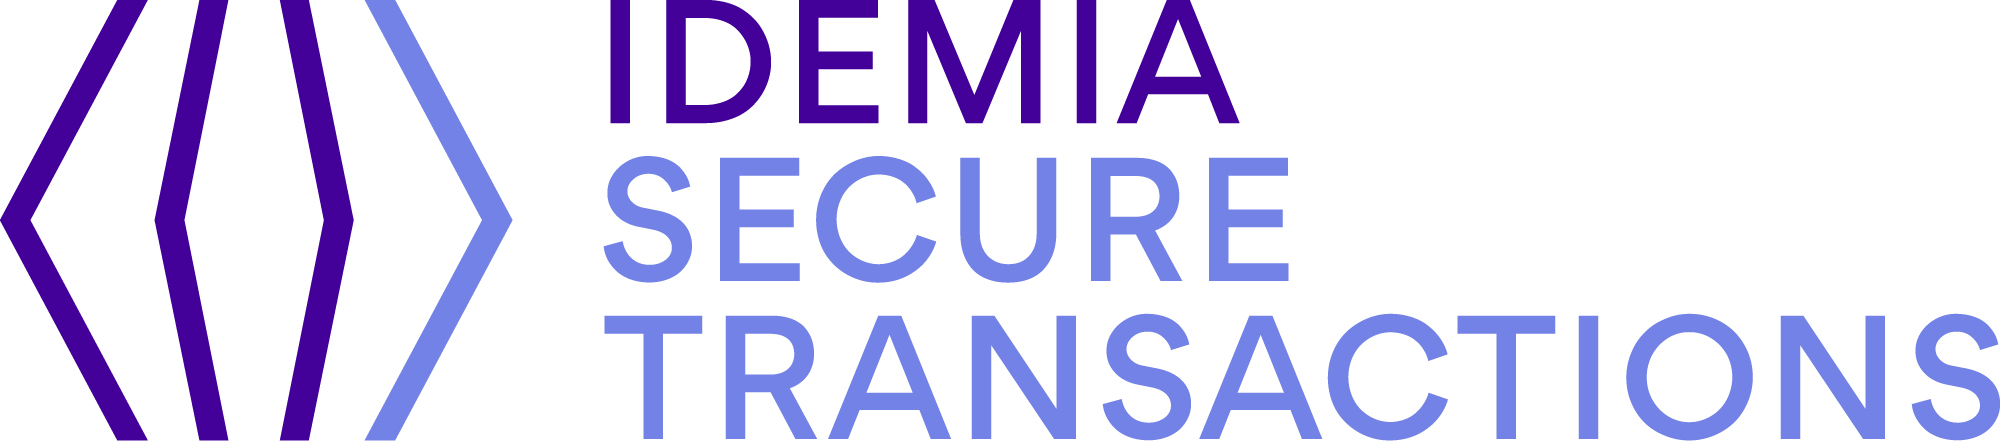 IDEMIA Secure Transactions